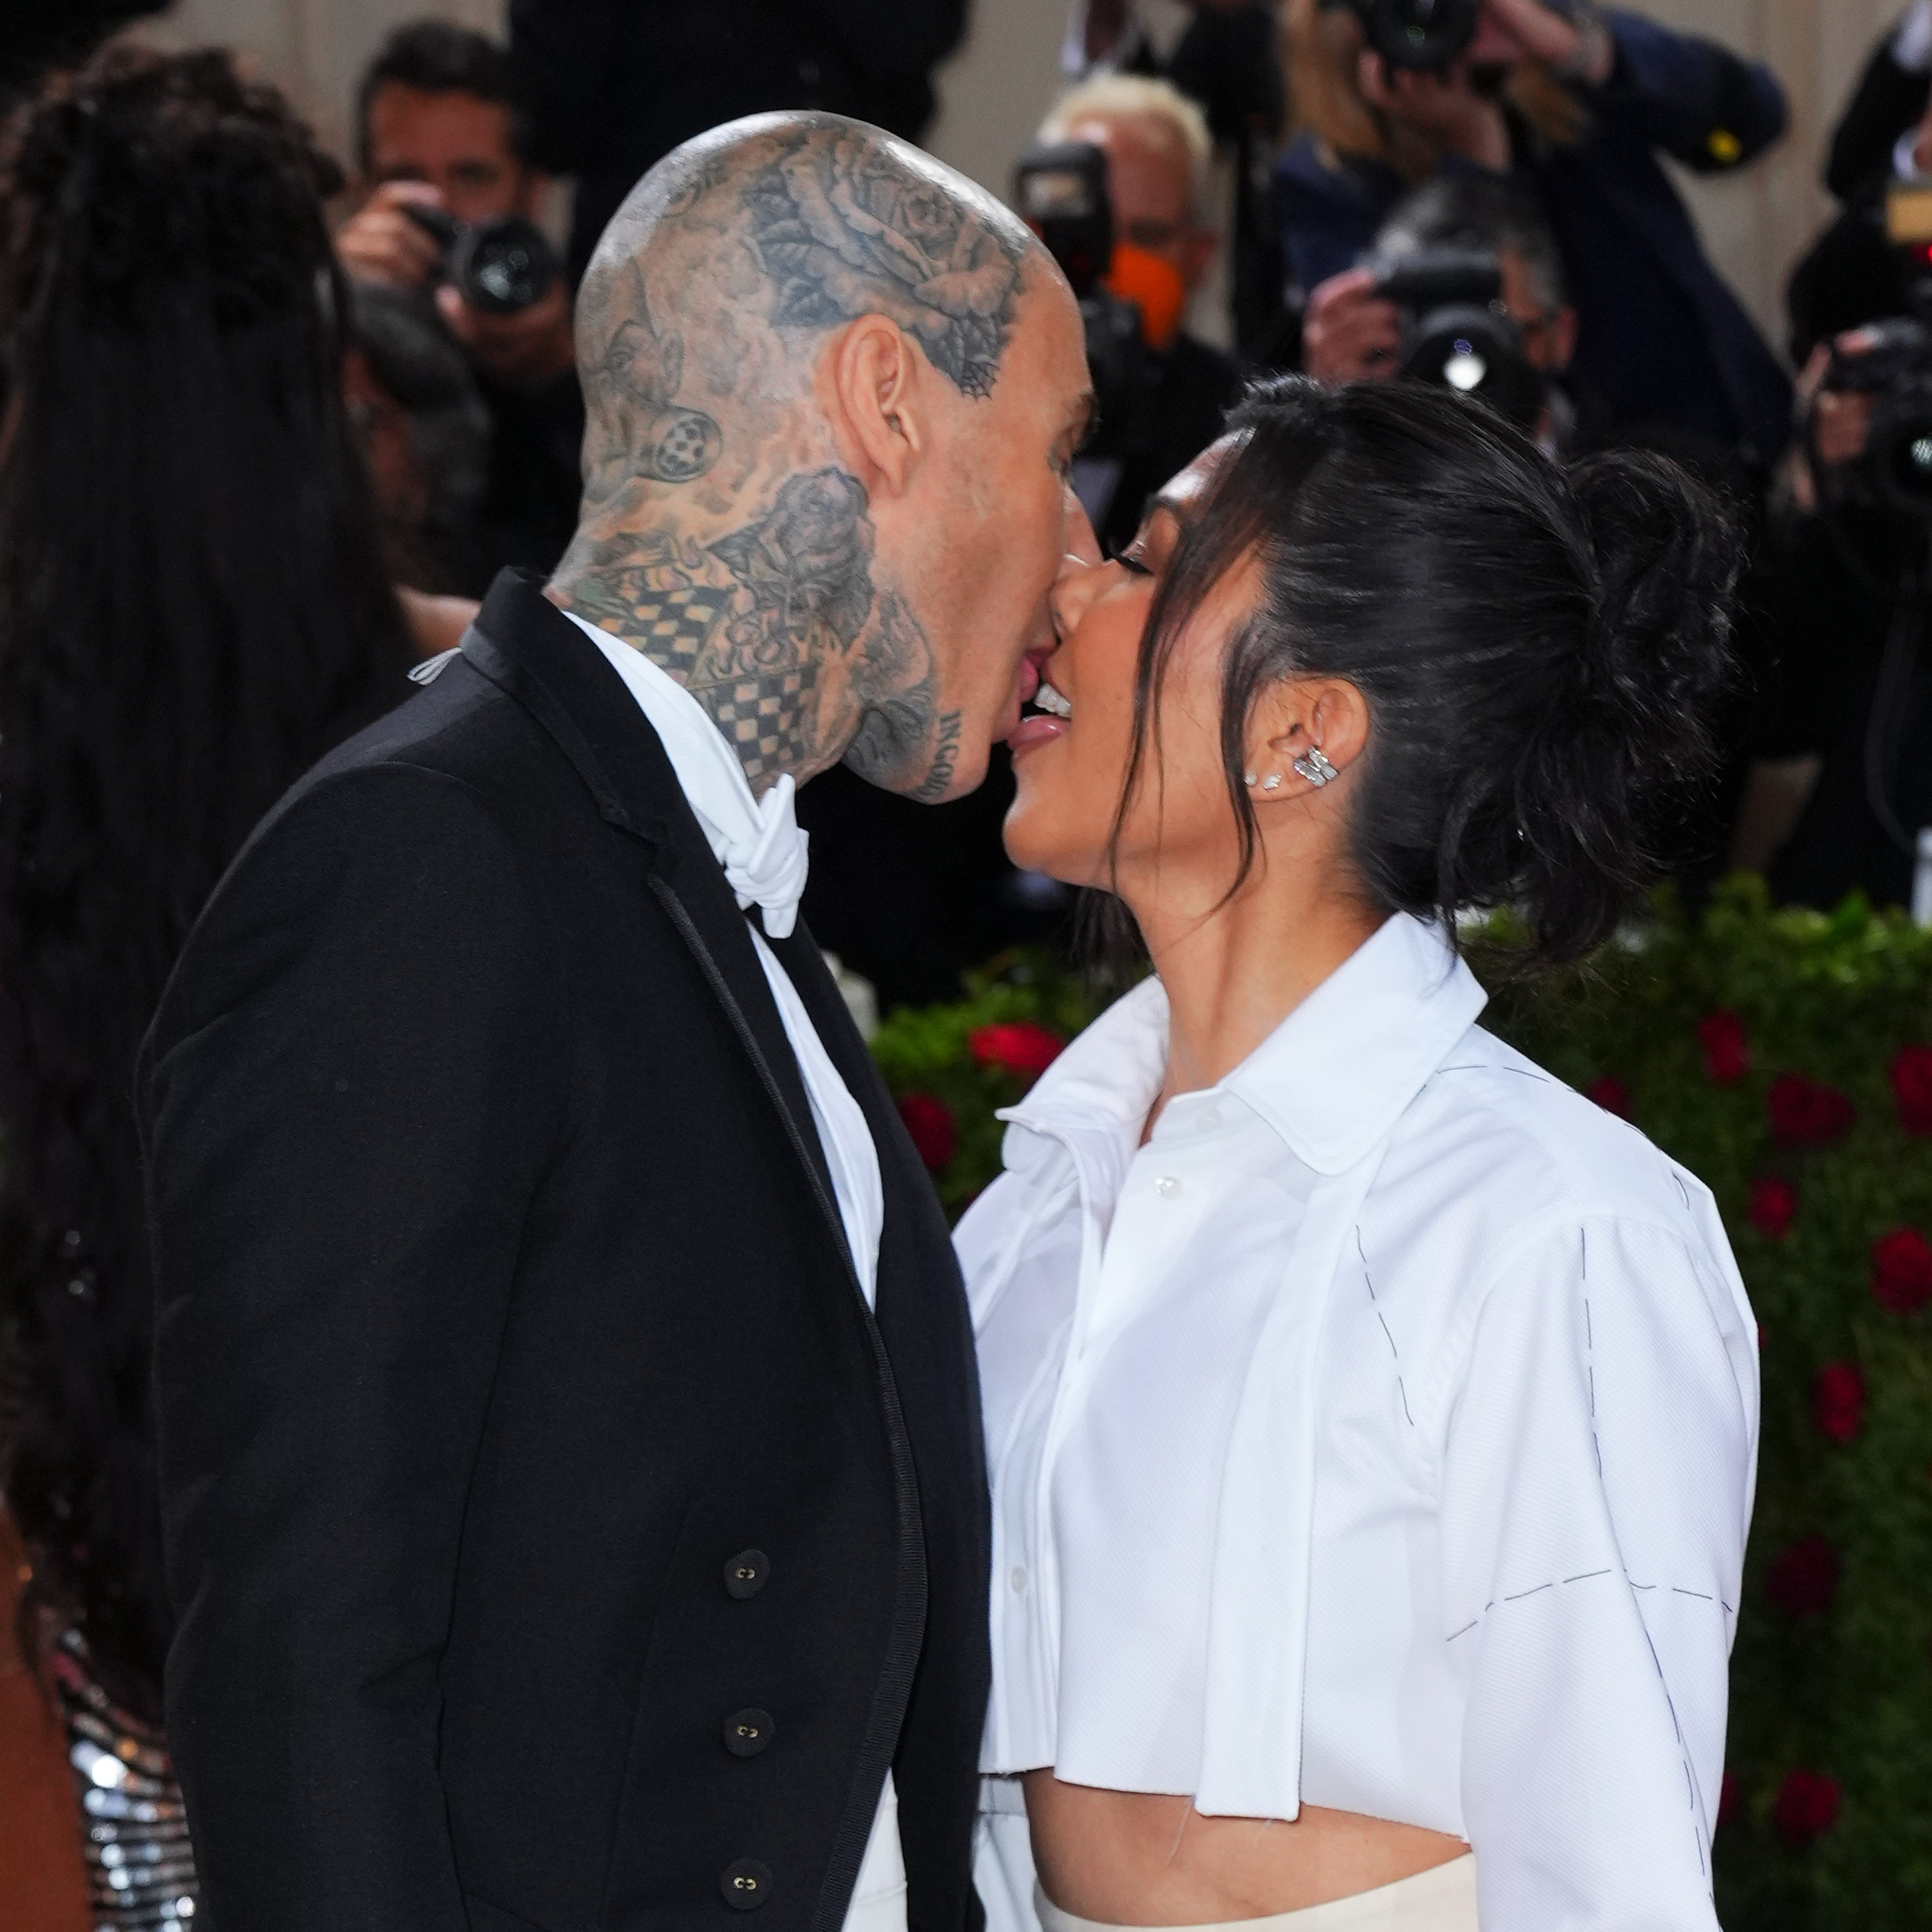 Travis Barker and Kourtney Kardashian at The 2022 Met Gala Celebrating "In America: An Anthology of Fashion" at The Metropolitan Museum of Art on May 2, 2022 in New York City. | Source: Getty Images